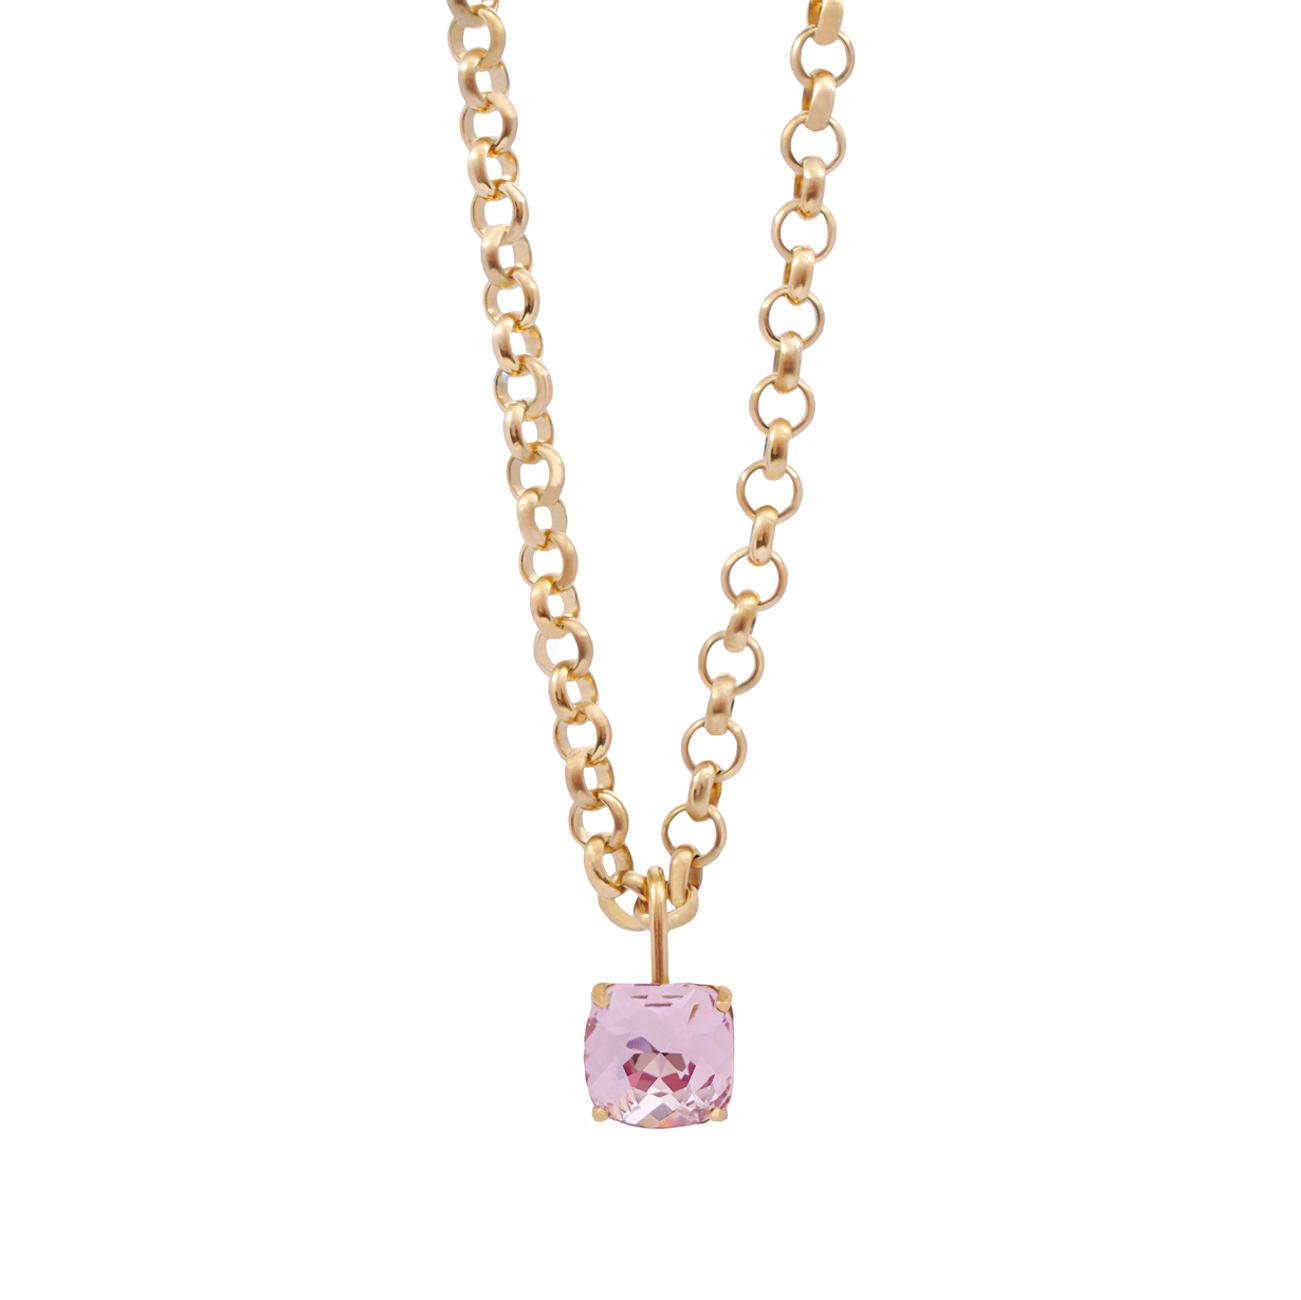 Carla Crystal chain halskjede - Pink favourite